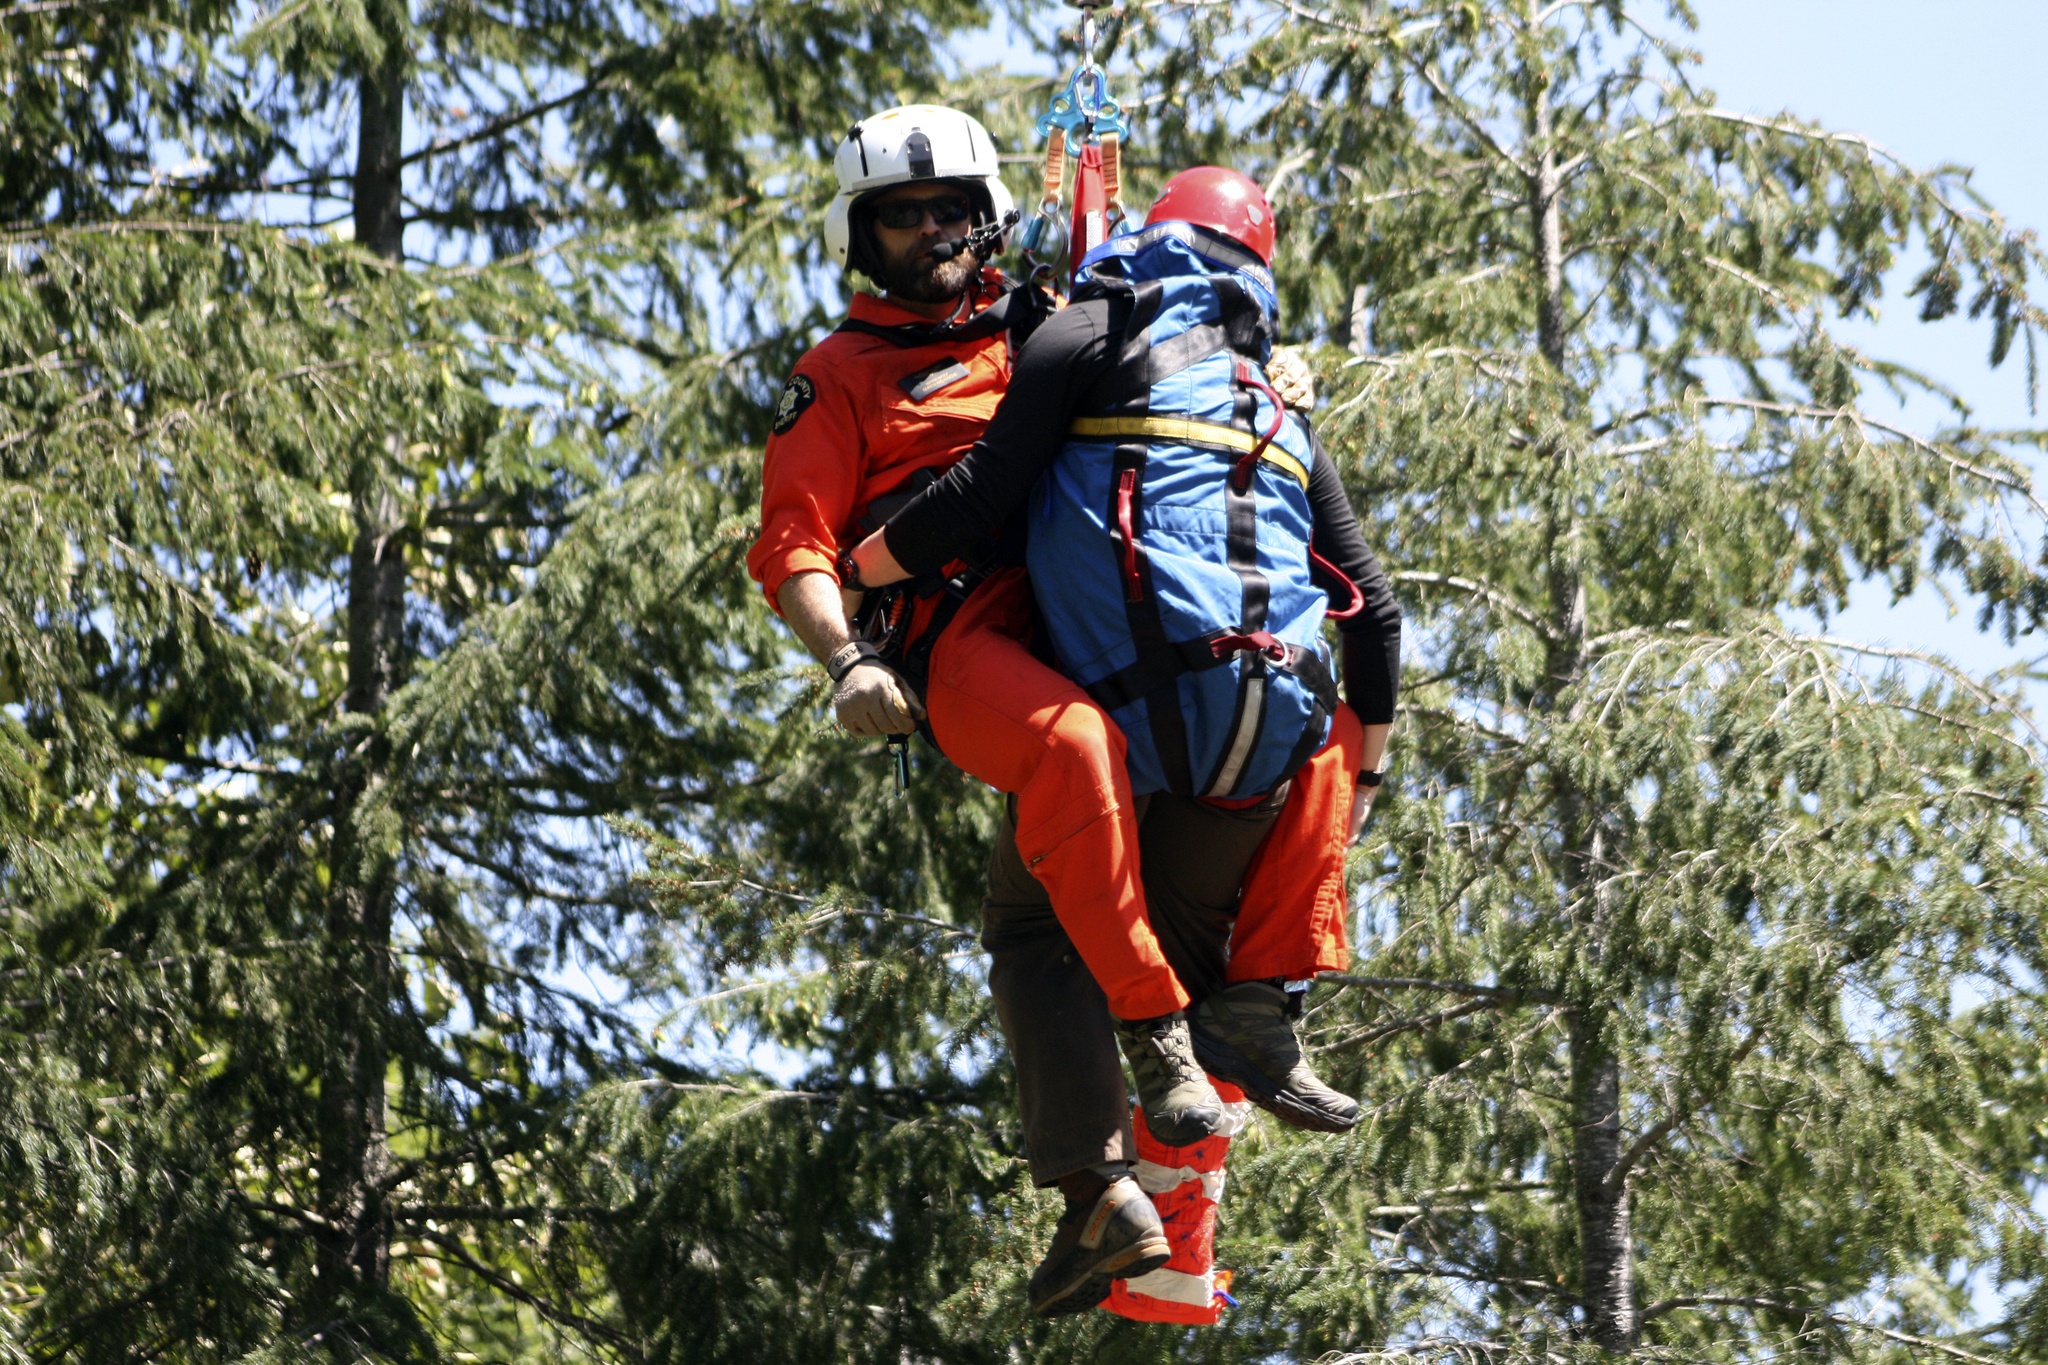 A deputy hoists a mock injury victim to safety during a recent King County Sheriff’s Office Search and Rescue training session. Photo courtesy of AARON KUNKLER/Kirkland Reporter